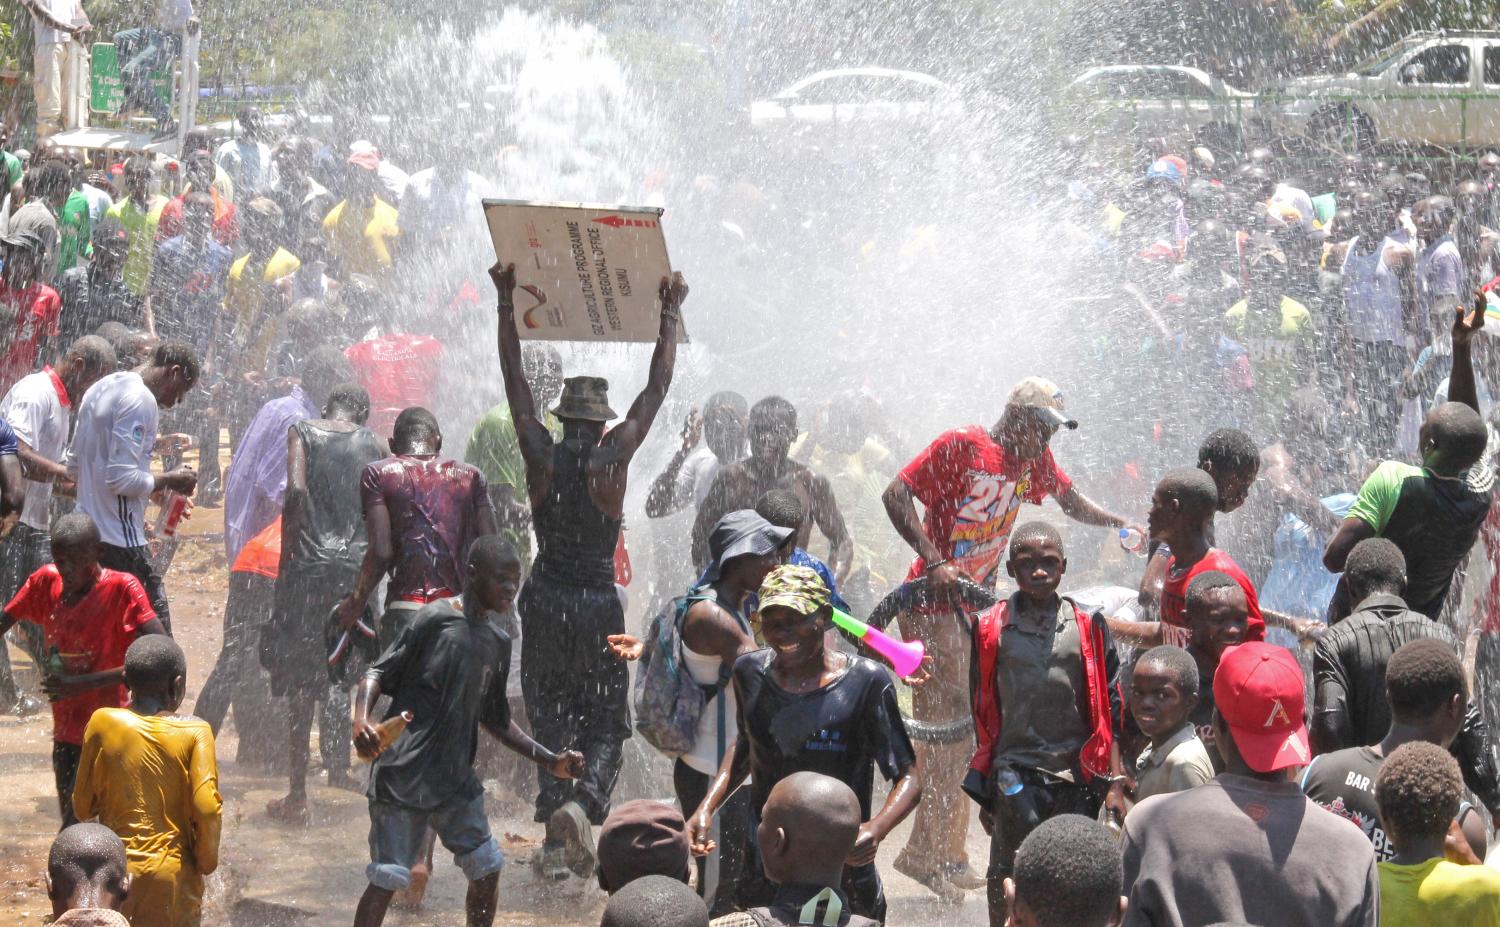 Supporters of the opposition National Super Alliance (NASA) coalition gather at a water fountain during a protest calling for the sacking of election board officials involved in August's cancelled presidential vote, in Kisumu, Kenya October 6, 2017. REUTERS/James Keyi - RC18F84DF2A0